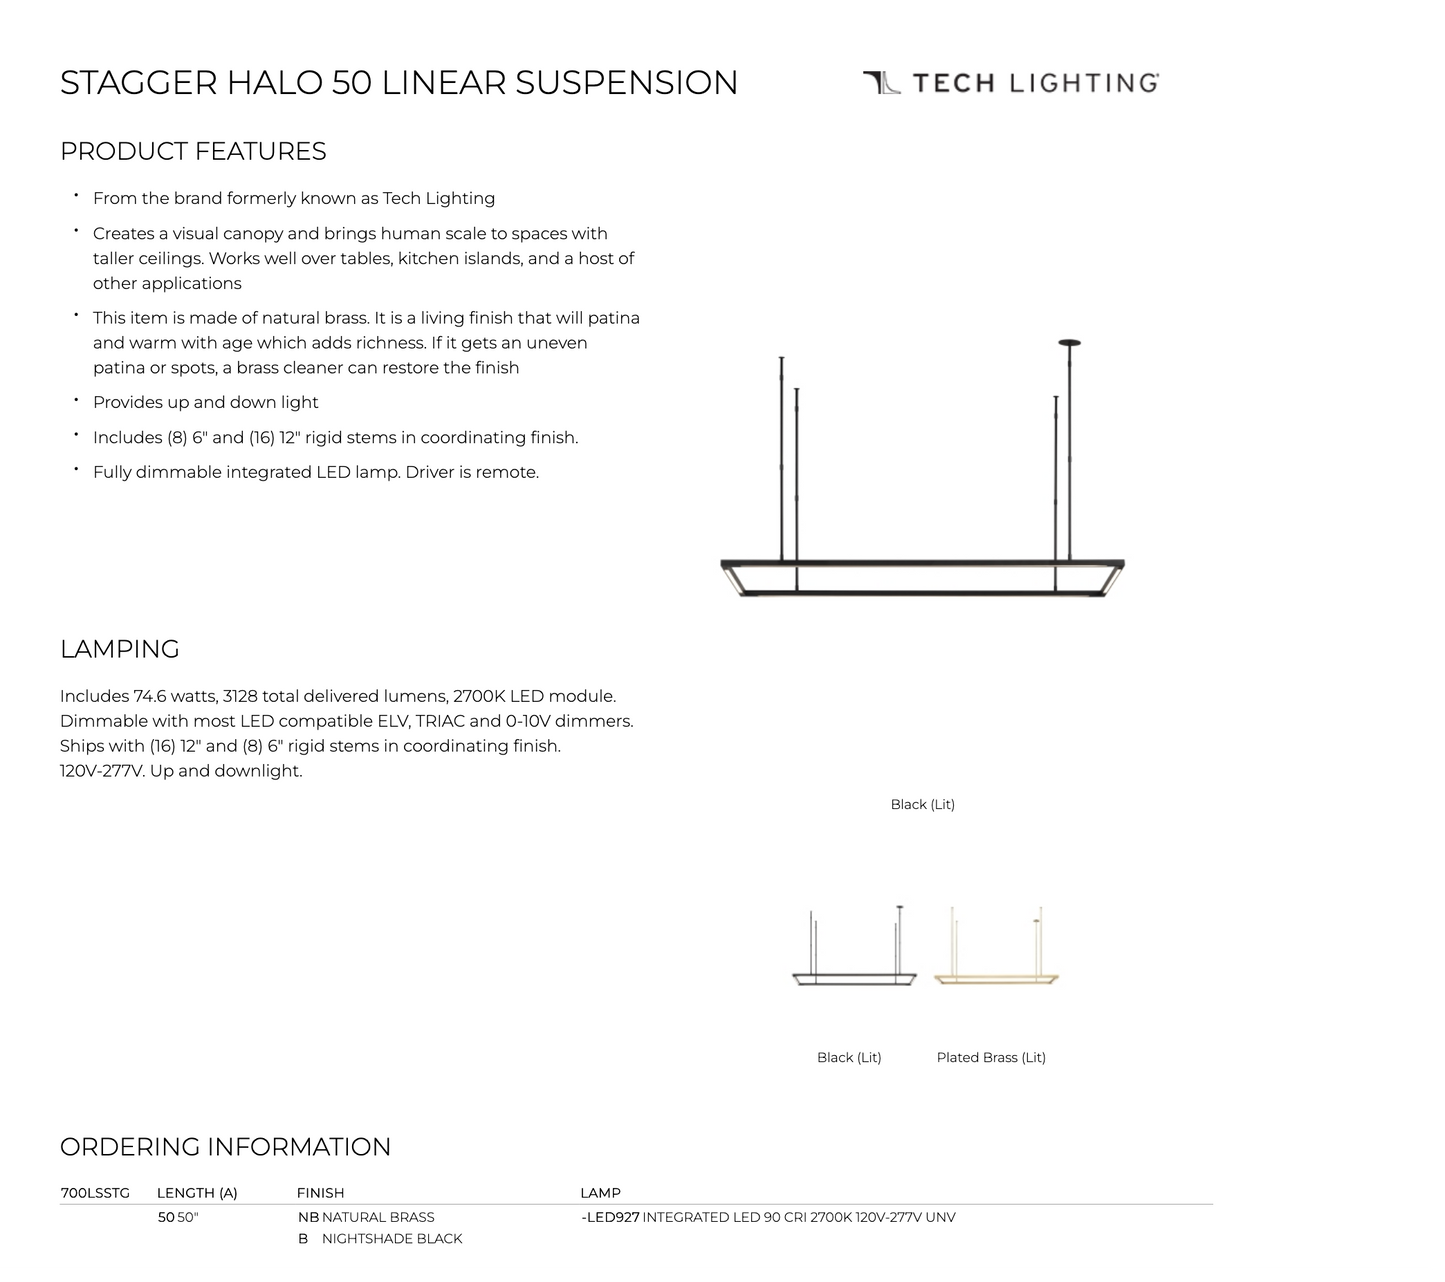 Stagger Halo 50 - Trendy Linear Suspension Lighting"